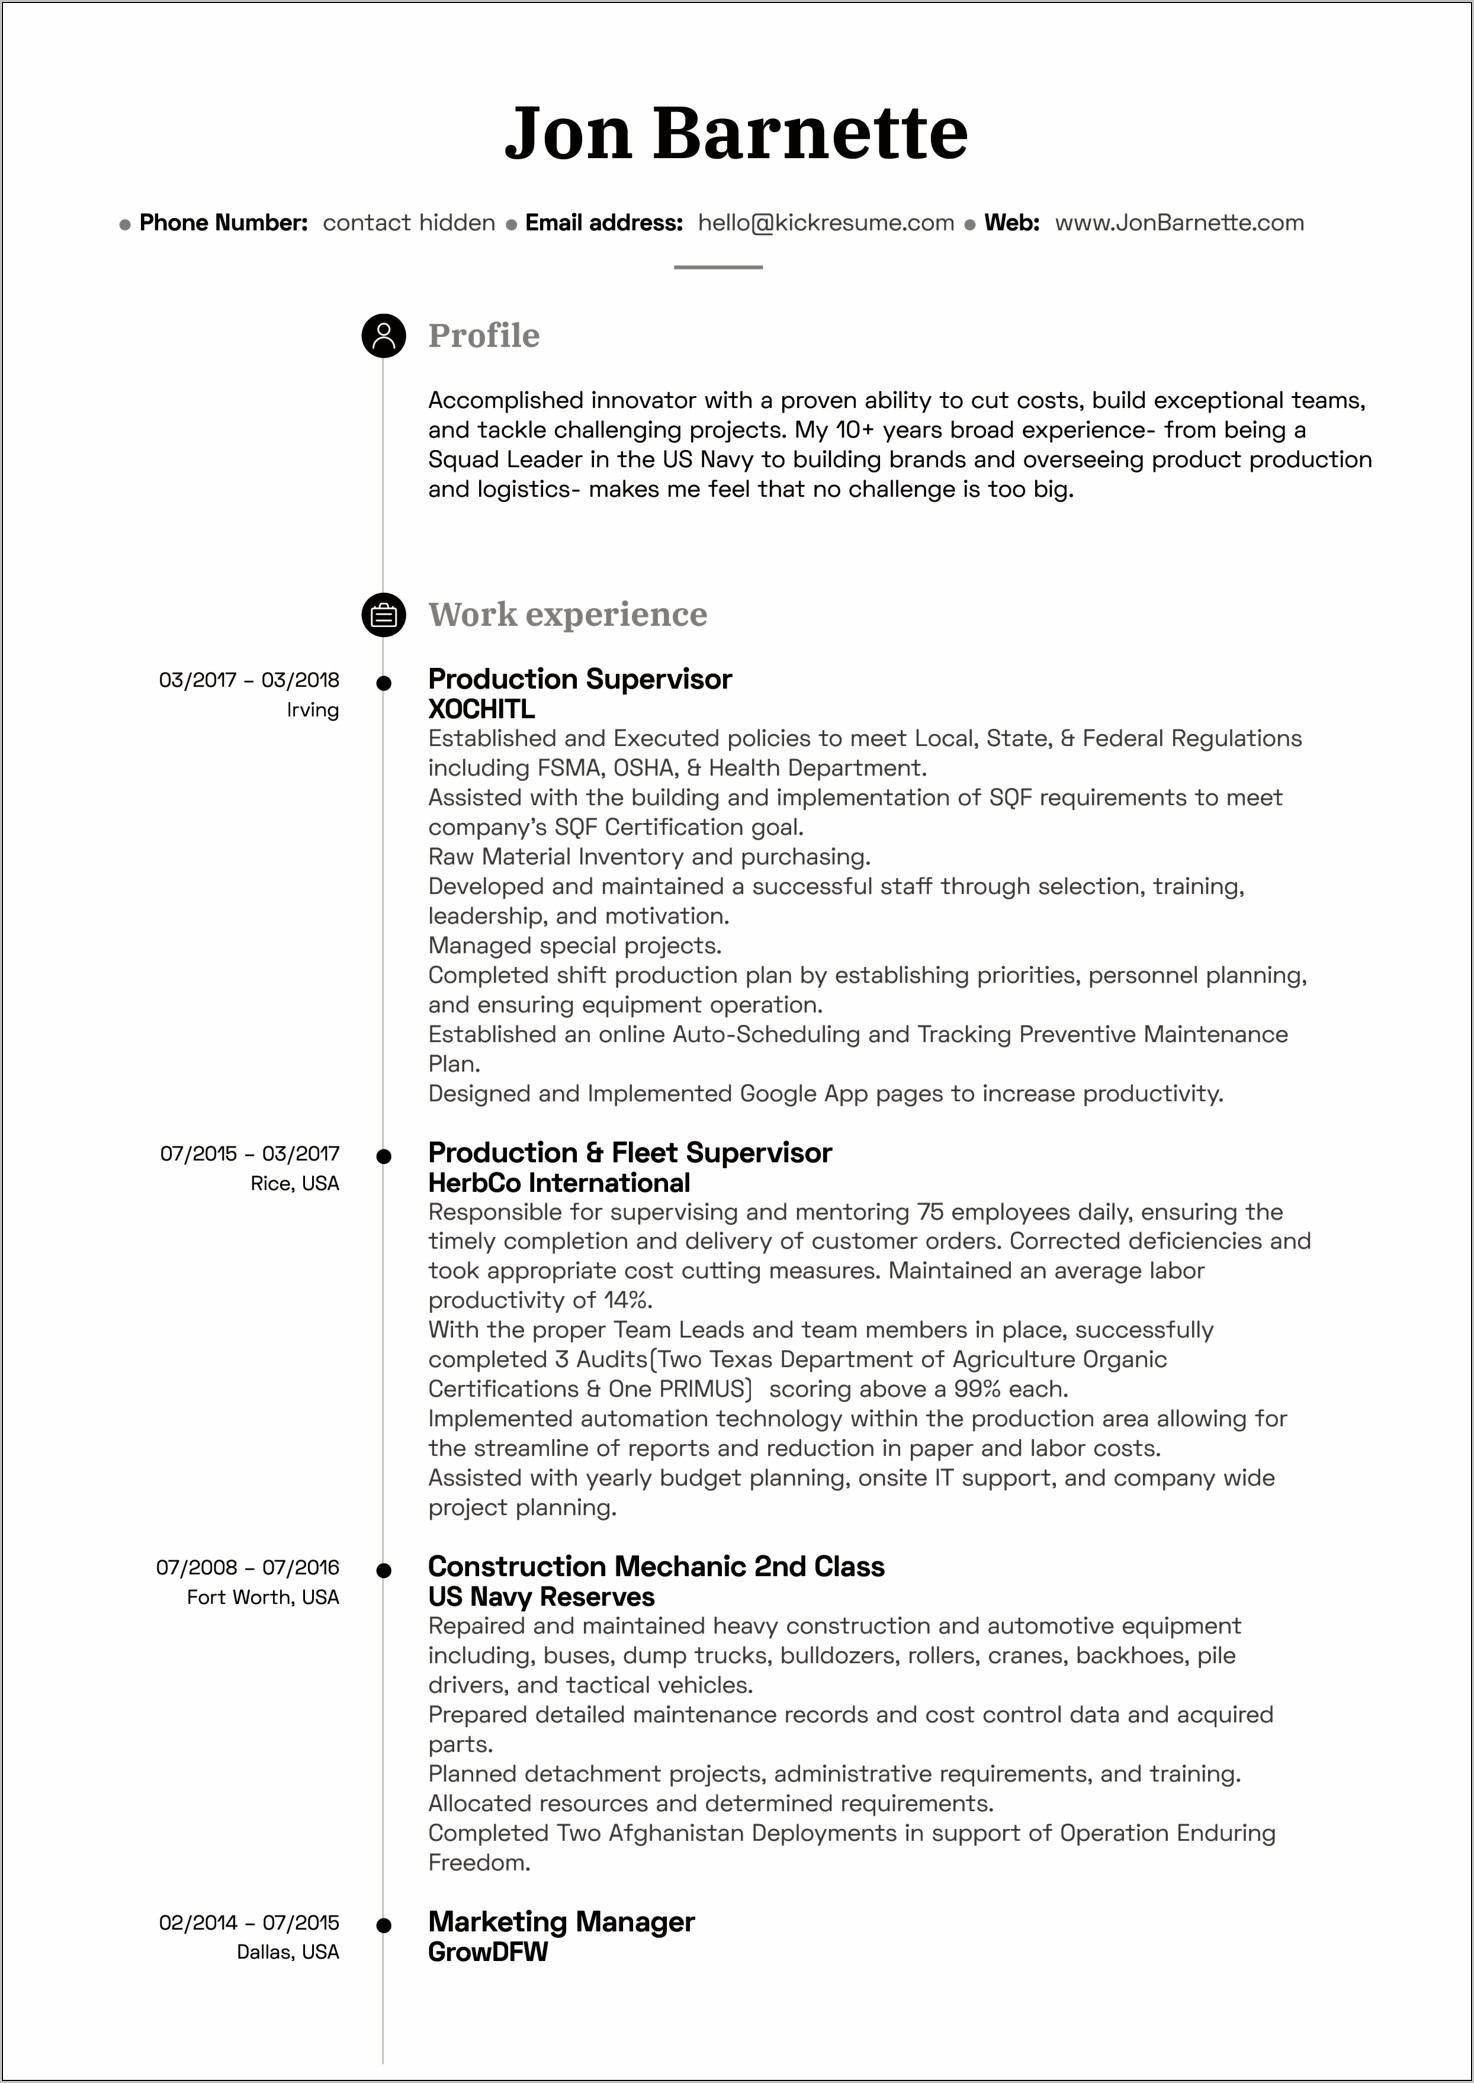 Production Manager Job Responsibilities Resume